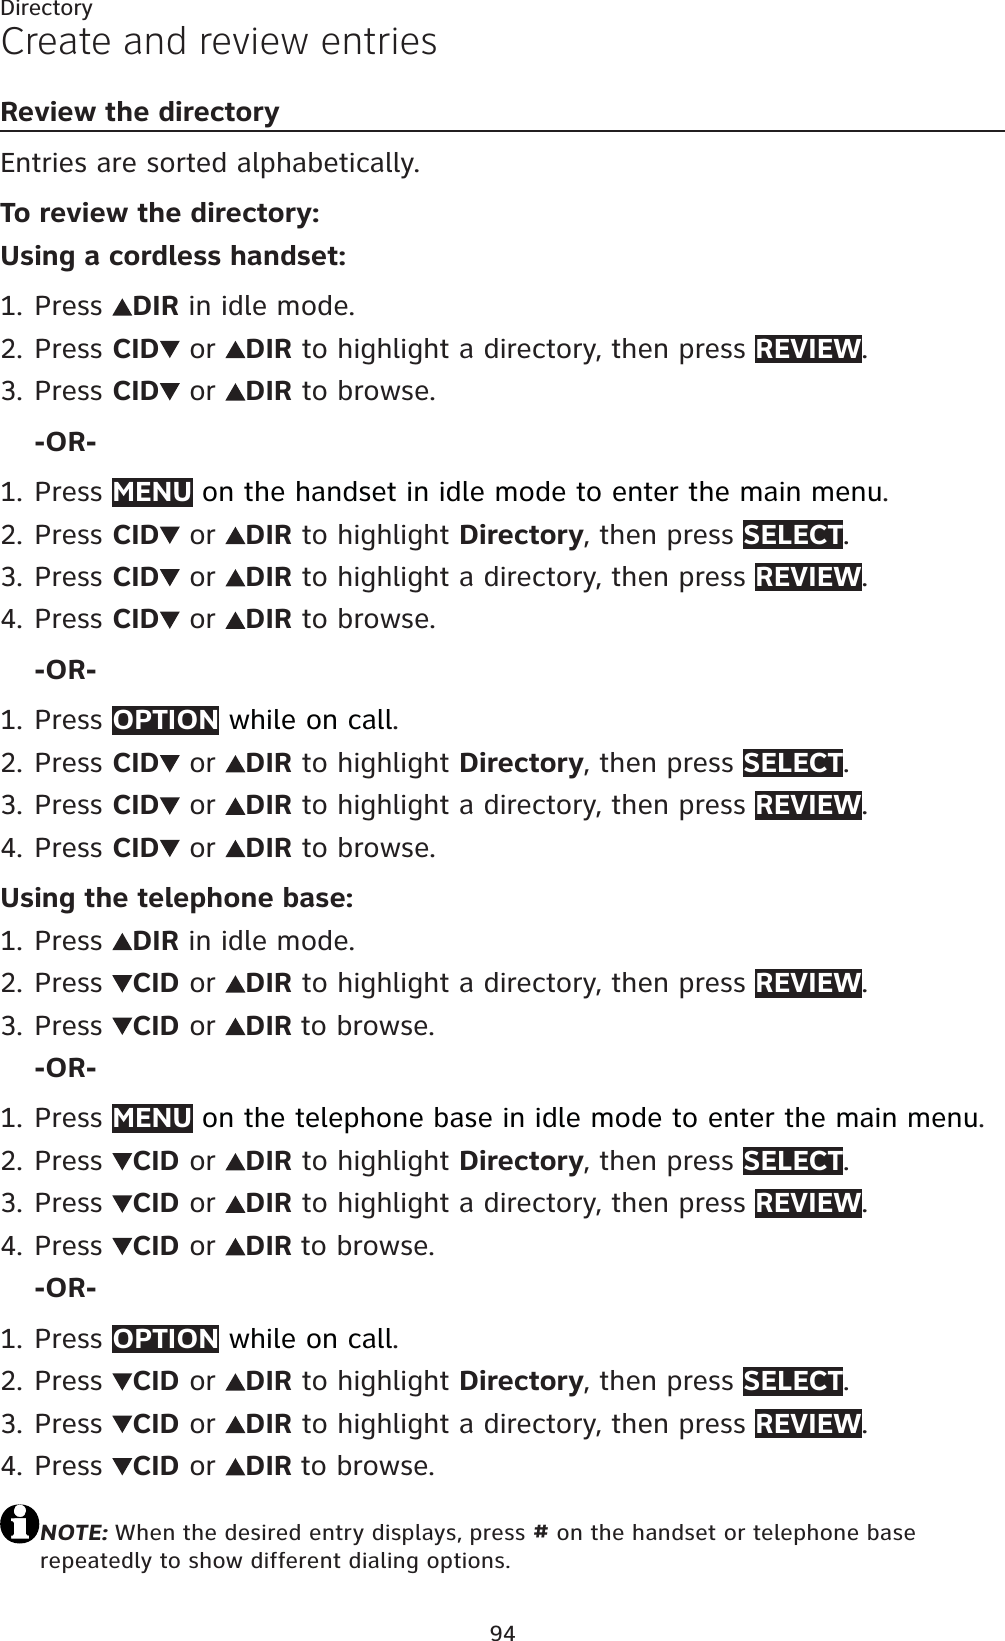 94DirectoryCreate and review entriesReview the directoryEntries are sorted alphabetically.To review the directory:Using a cordless handset:Press  DIR in idle mode.Press CID  or  DIR to highlight a directory, then press REVIEW.Press CID  or  DIR to browse.-OR-Press MENU on the handset in idle mode to enter the main menu.Press CID  or  DIR to highlight Directory, then press SELECT.Press CID  or  DIR to highlight a directory, then press REVIEW.Press CID  or  DIR to browse.-OR-Press OPTION while on call.Press CID  or  DIR to highlight Directory, then press SELECT.Press CID  or  DIR to highlight a directory, then press REVIEW.Press CID  or  DIR to browse.Using the telephone base:Press  DIR in idle mode.Press  CID or  DIR to highlight a directory, then press REVIEW.Press  CID or  DIR to browse.-OR-Press MENU on the telephone base in idle mode to enter the main menu.Press  CID or  DIR to highlight Directory, then press SELECT.Press  CID or  DIR to highlight a directory, then press REVIEW.Press  CID or  DIR to browse.-OR-Press OPTION while on call.Press  CID or  DIR to highlight Directory, then press SELECT.Press  CID or  DIR to highlight a directory, then press REVIEW.Press  CID or  DIR to browse.NOTE: When the desired entry displays, press # on the handset or telephone base repeatedly to show different dialing options.1.2.3.1.2.3.4.1.2.3.4.1.2.3.1.2.3.4.1.2.3.4.